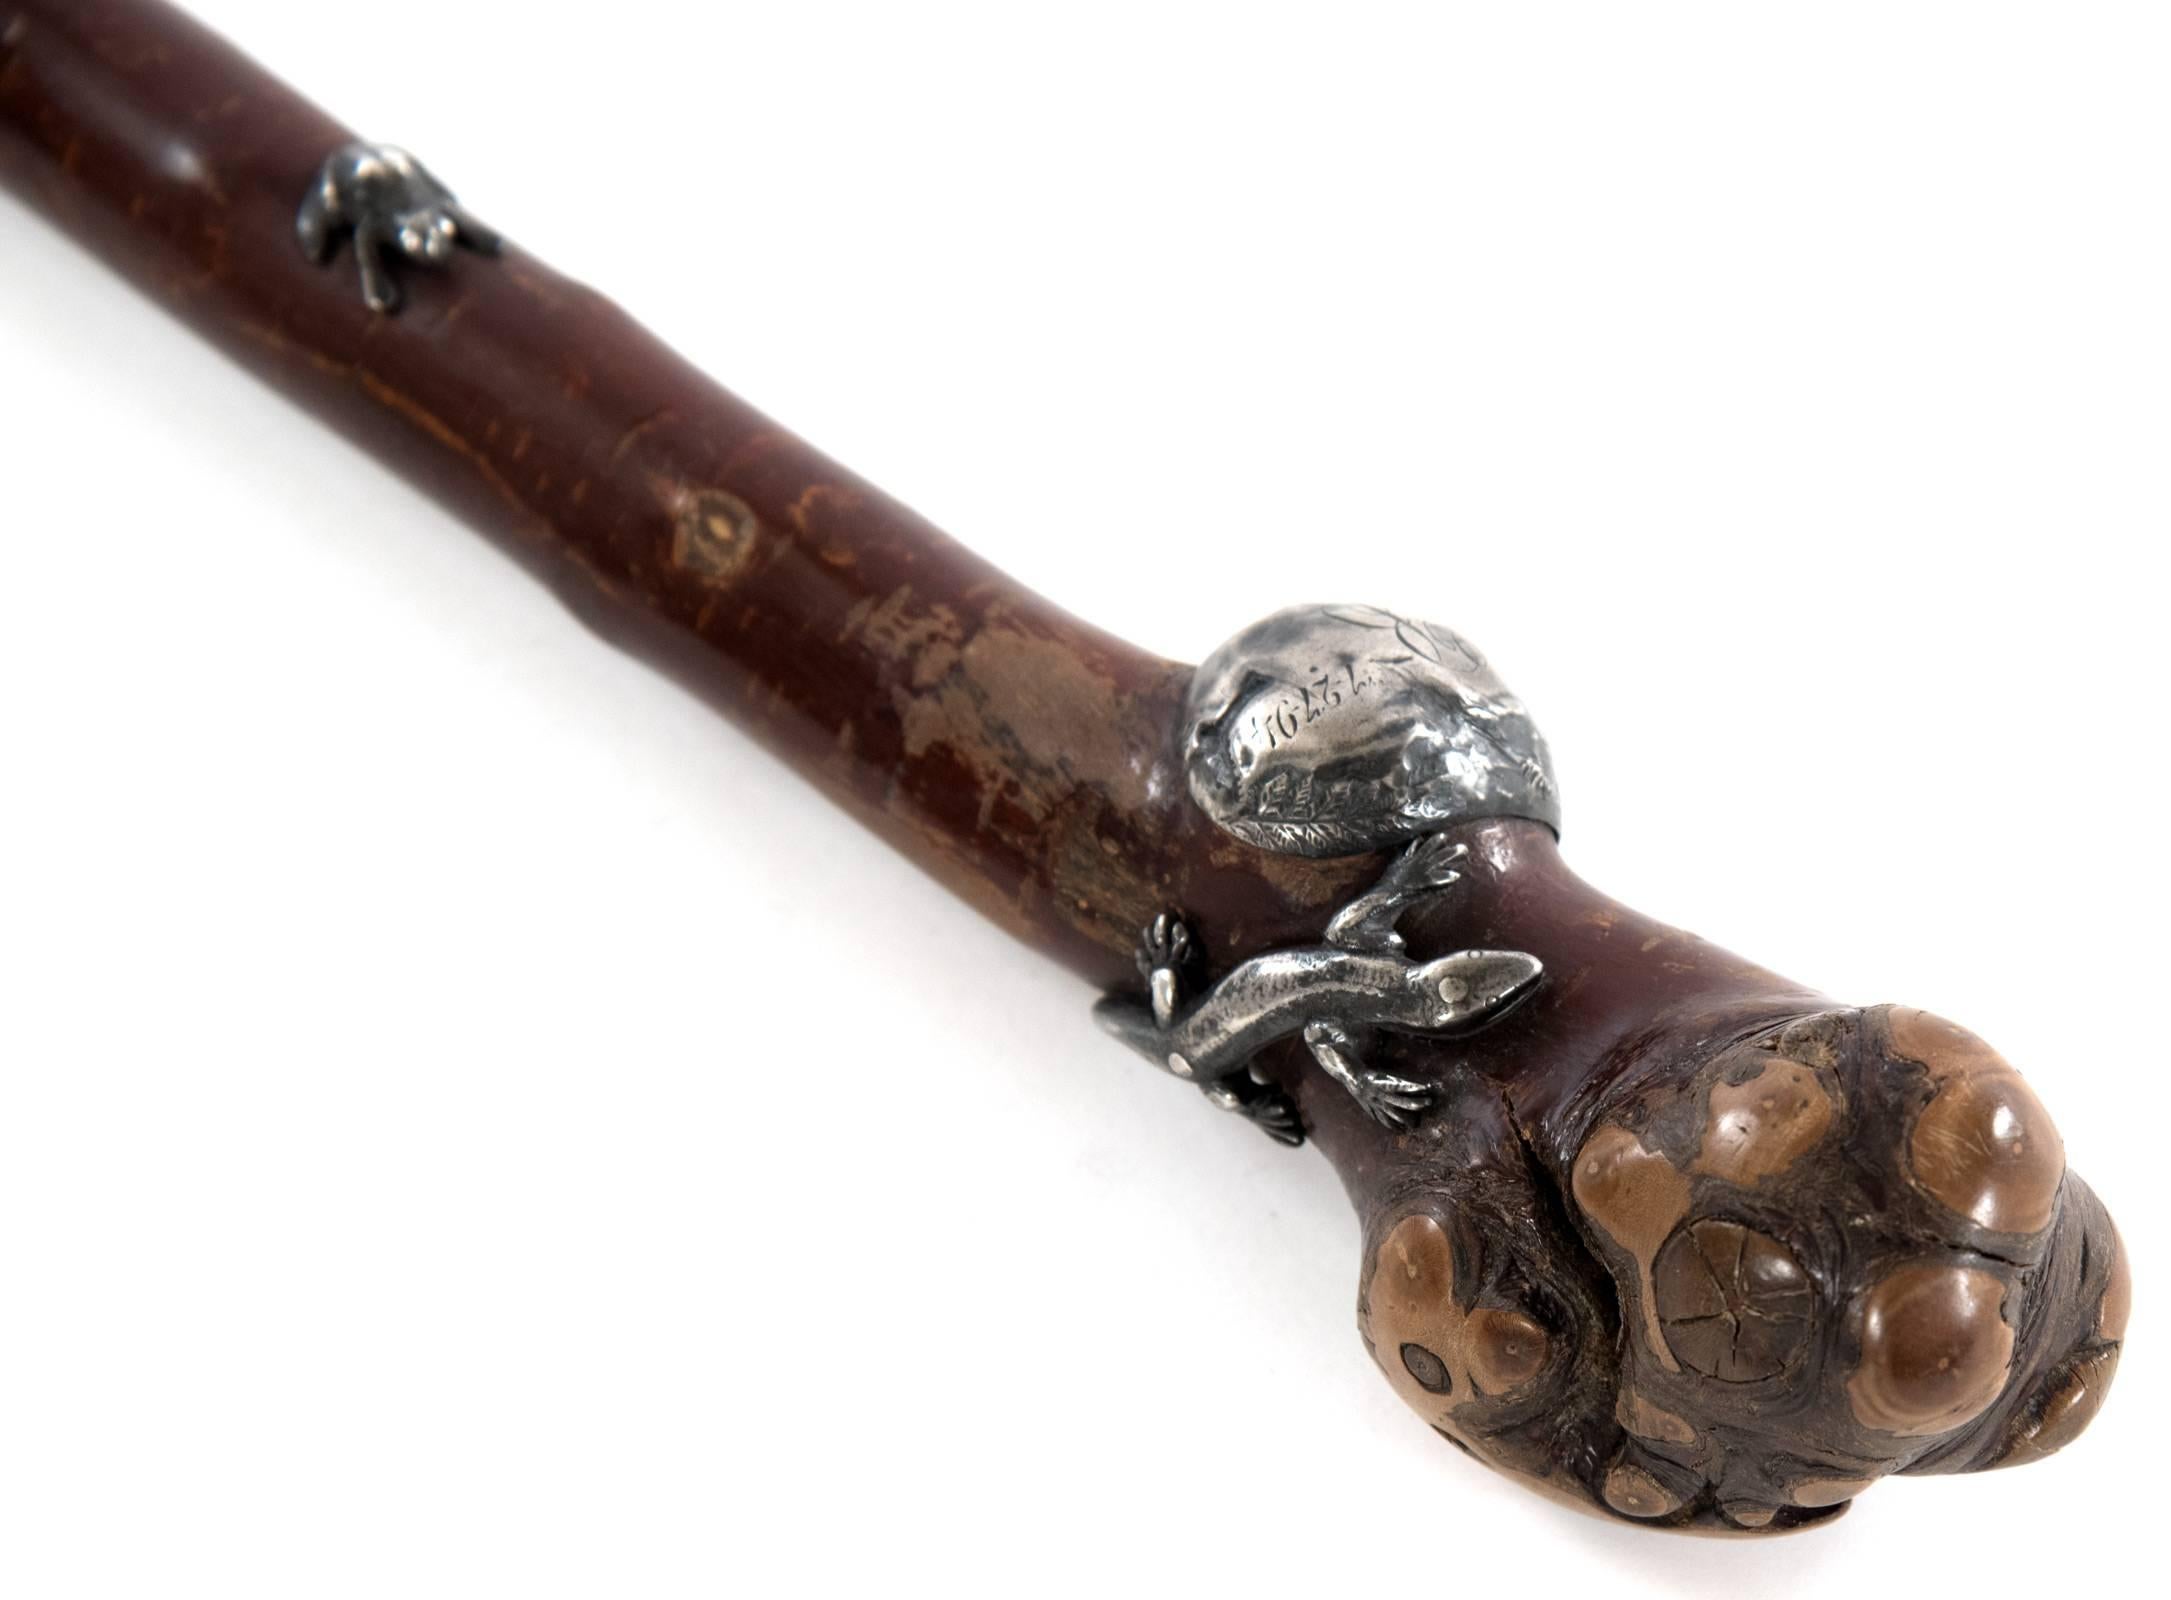 Oceanic Organic Walking Stick with Silver Decorative Elements